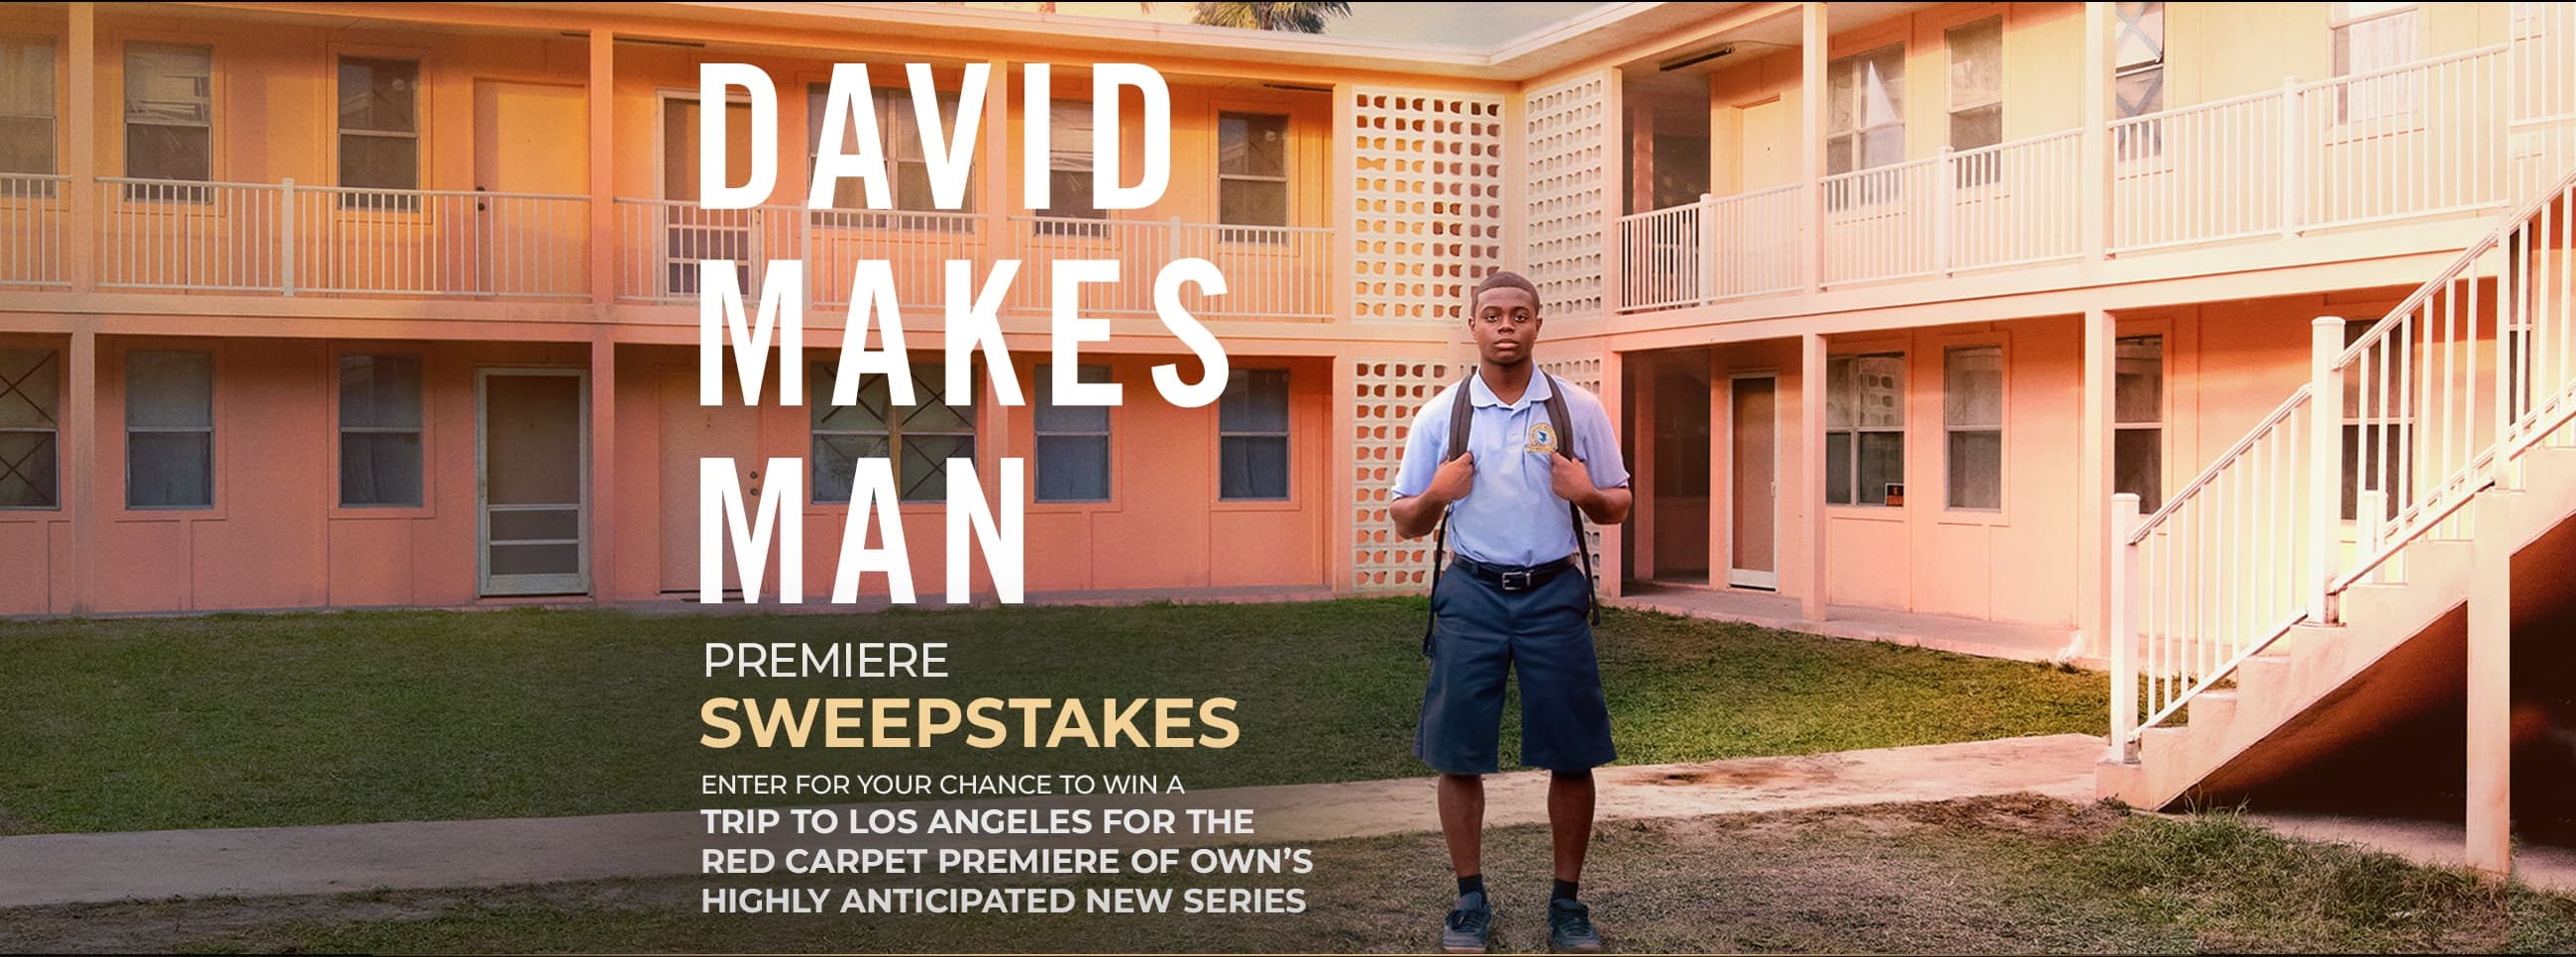 Dave Makes Man Sweepstakes Code Word - Winzily